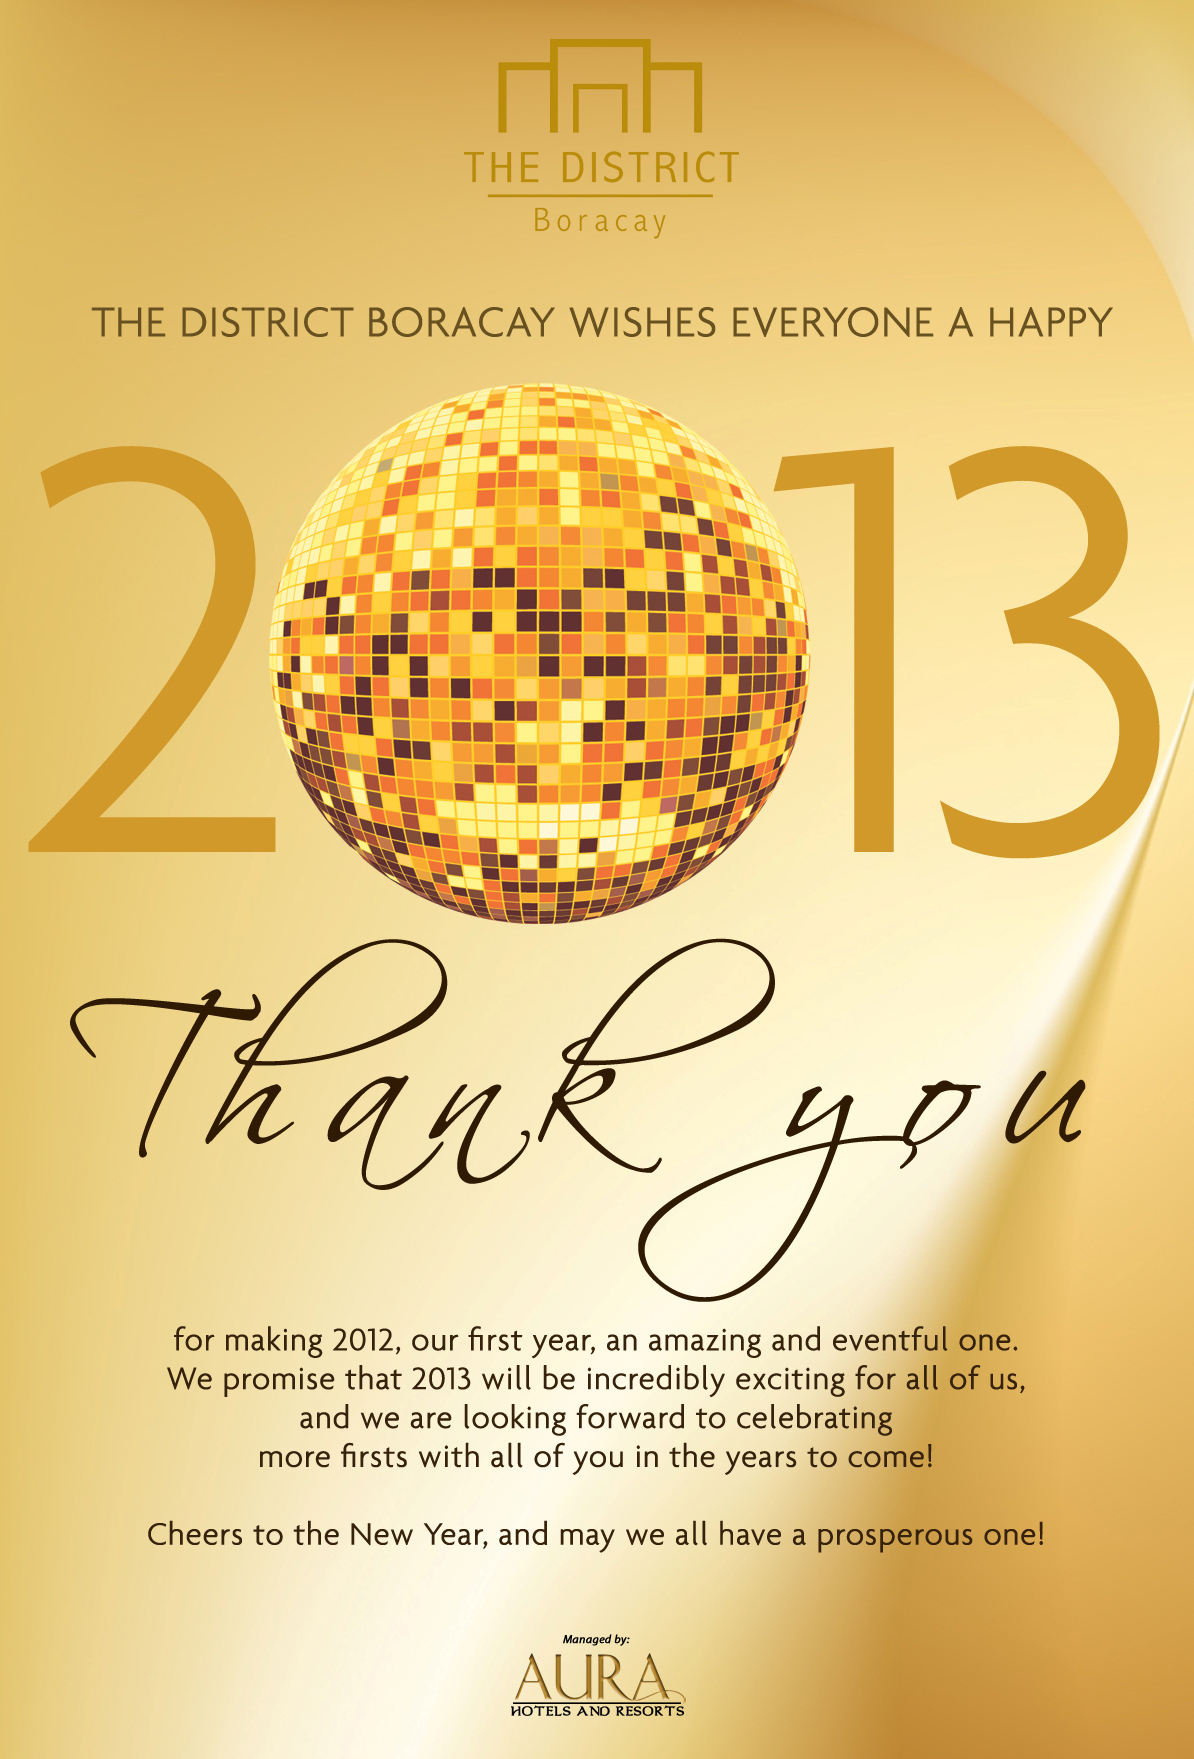 Happy New Year, from all of us at The District Boracay